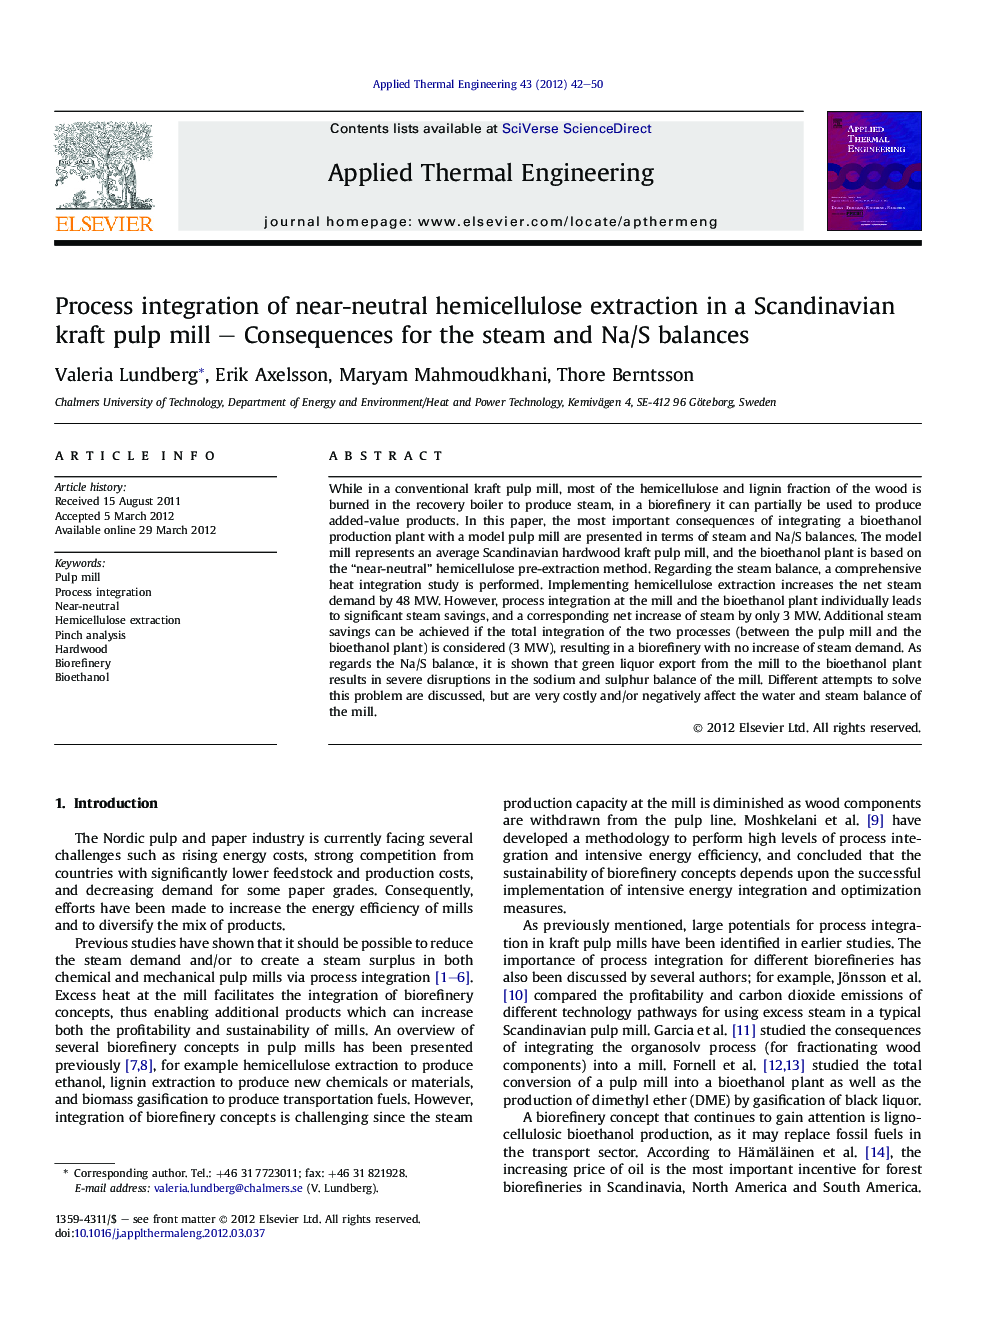 Process integration of near-neutral hemicellulose extraction in a Scandinavian kraft pulp mill – Consequences for the steam and Na/S balances